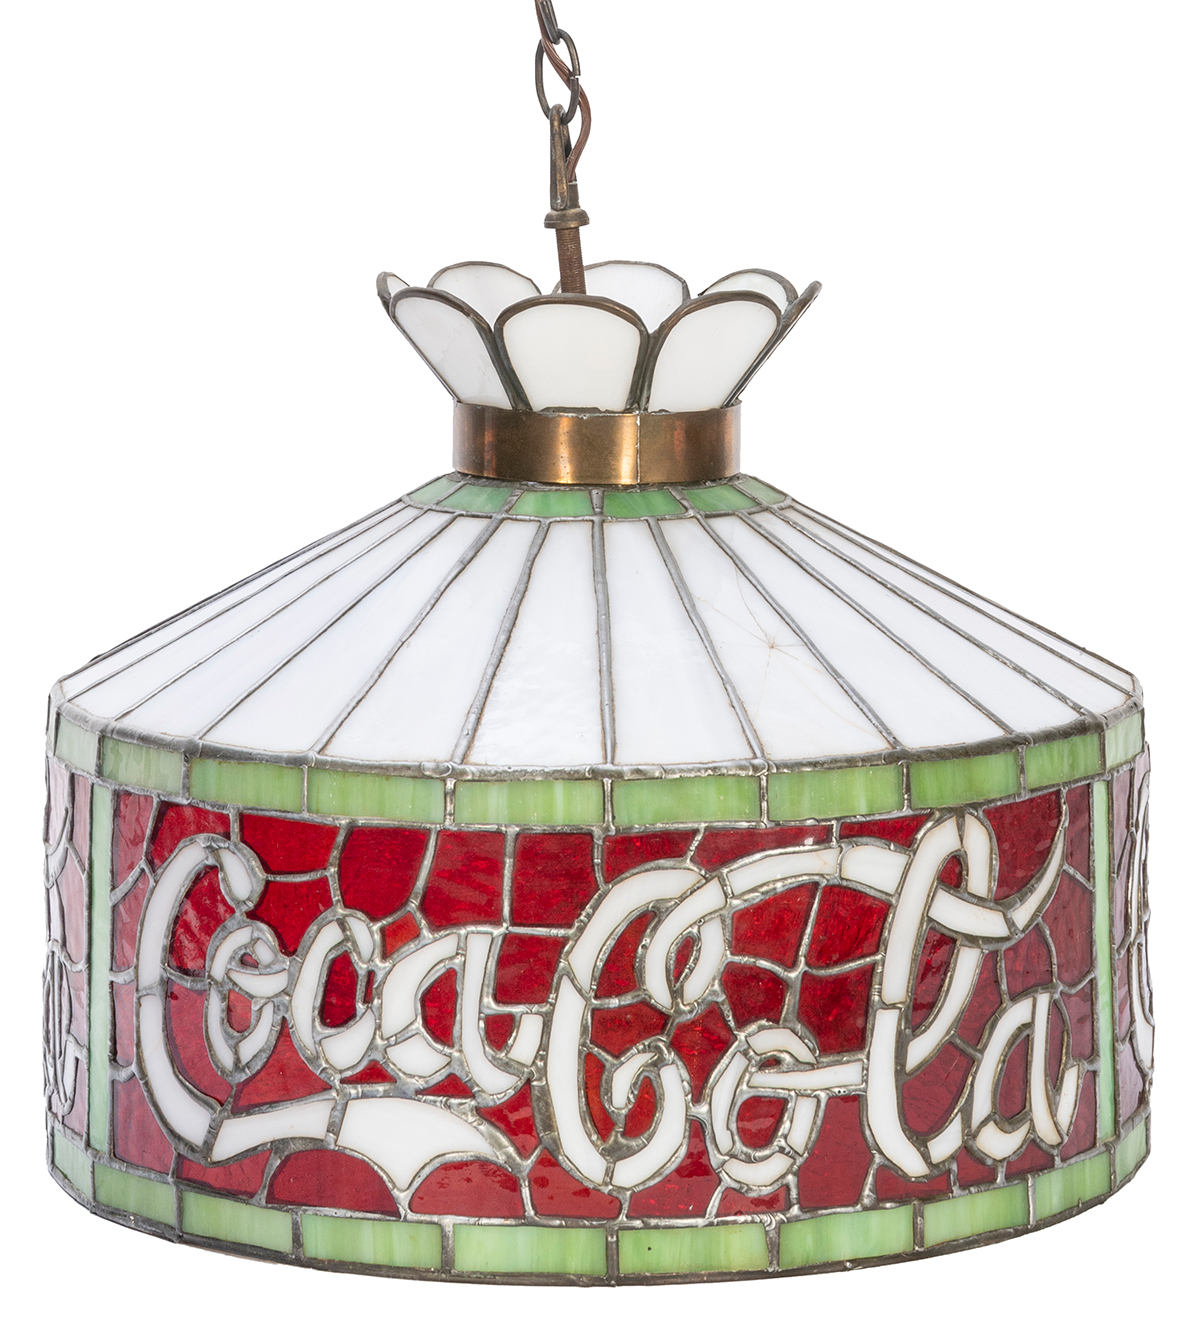 Lot Detail - Coca-Cola Hanging Lamp. Circa 1920s. Stained glass lamp adv...